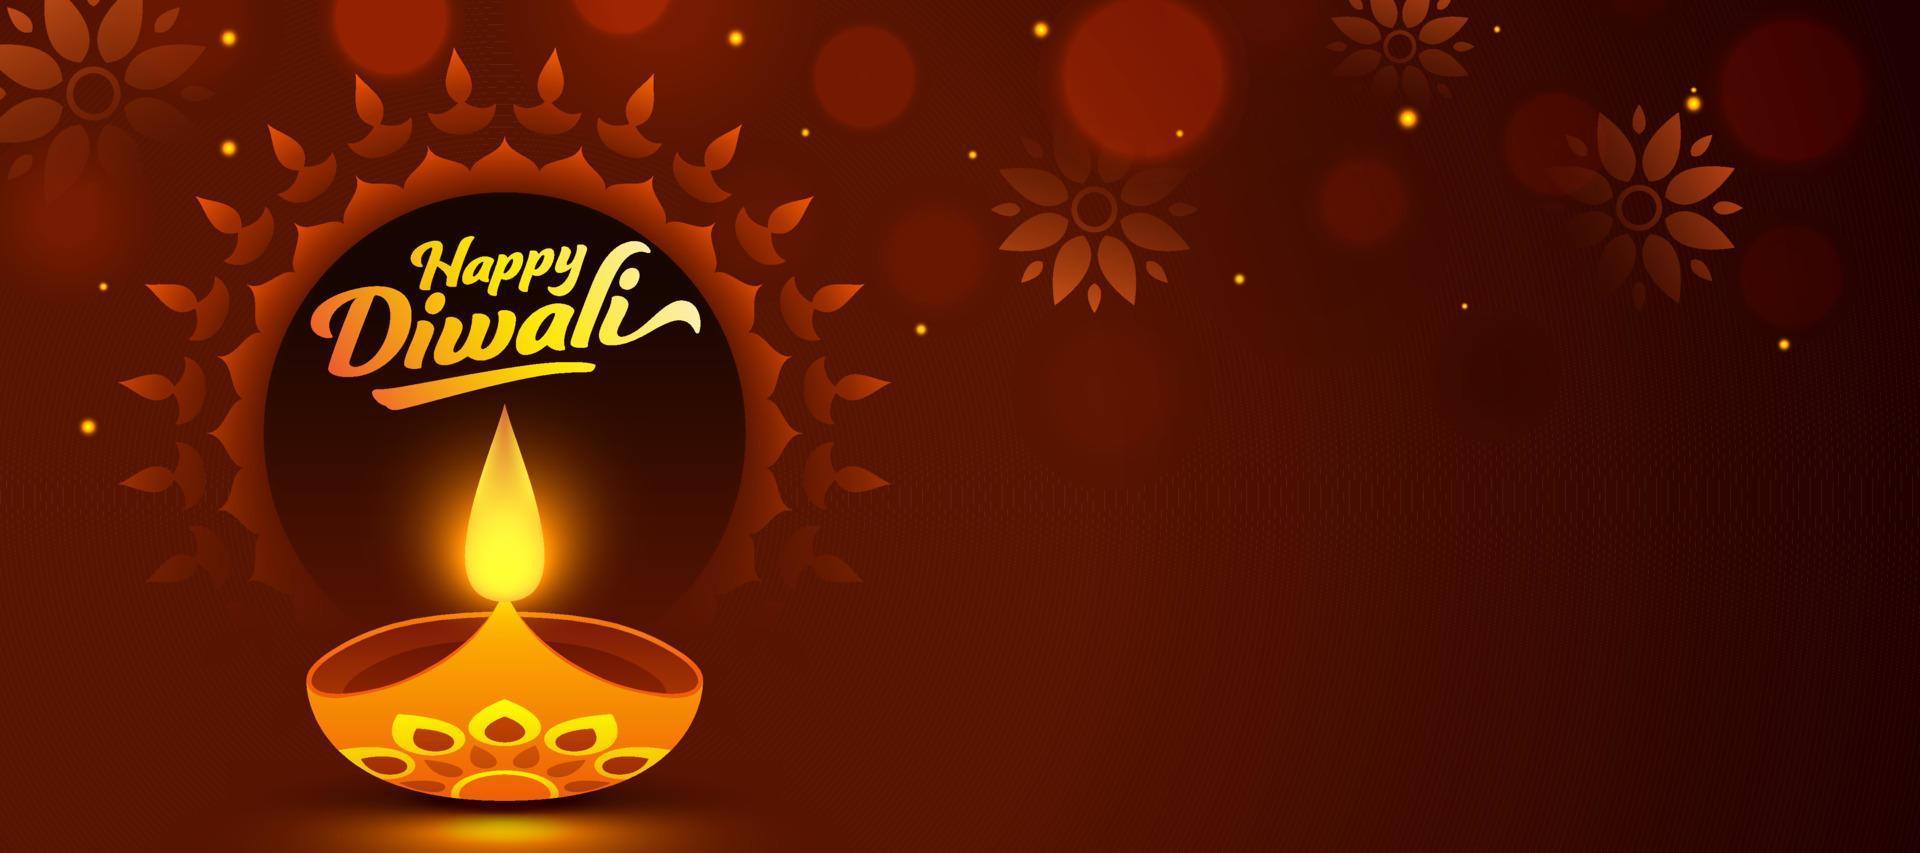 Happy Diwali Font with Lit Oil Lamp and Floral Pattern Decorated on Brown Background. vector